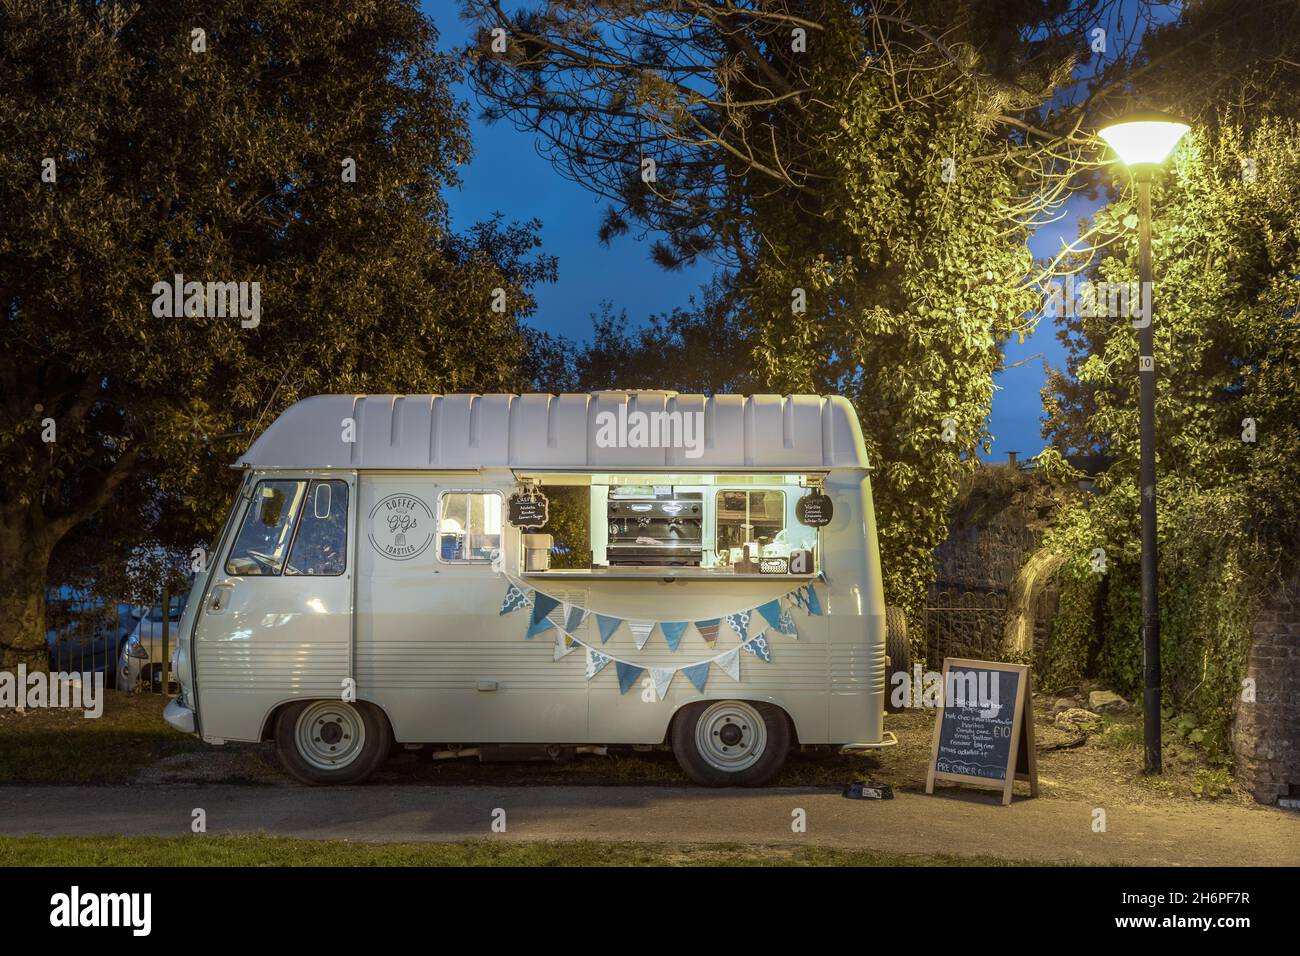 Passage, Cork, Ireland. 16th November, 2021. A classic 1976 peugeot j7 campervan which has now been converted as a mobile coffee shop at the seafront in late evening at Passage, Co. Cork, Ireland. - Picture; David Creedon / Alamy Live News Stock Photo